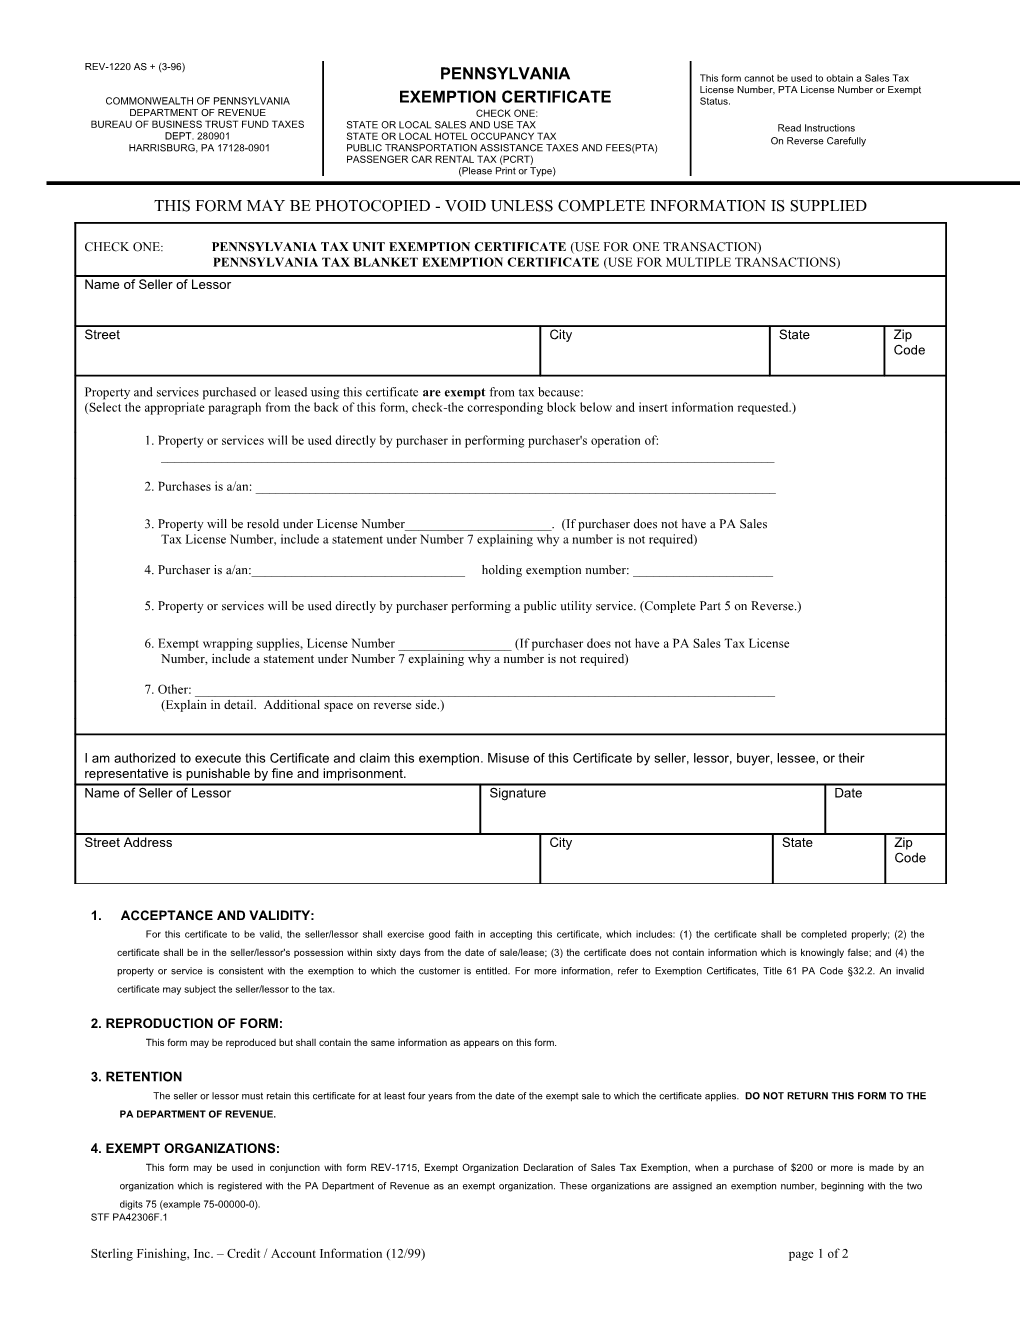 This Form May Be Photocopied Void Unless Complete Information Is Supplied